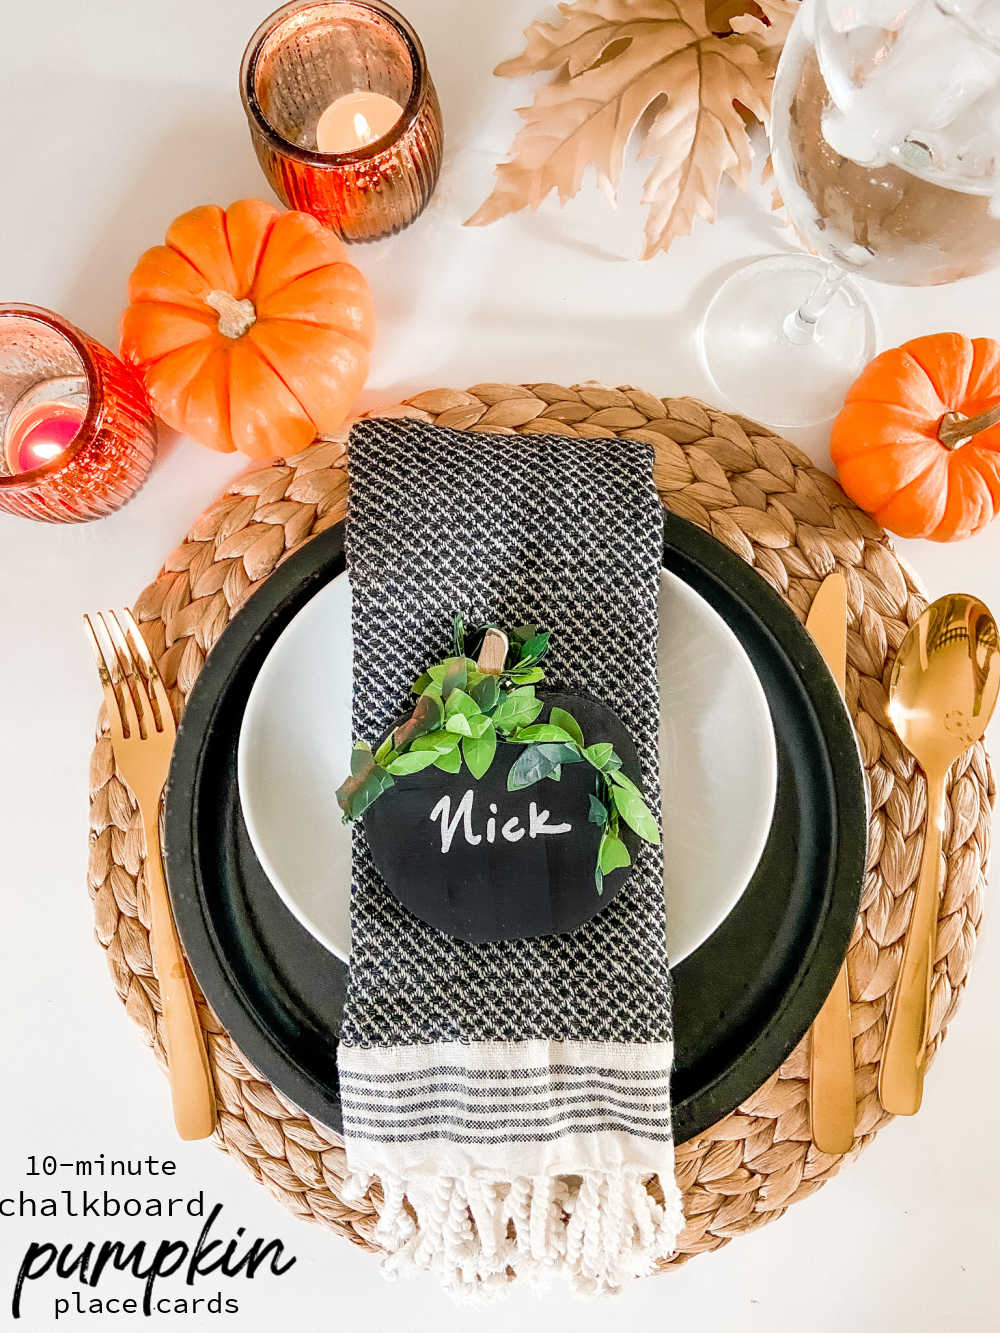 DIY Wood Chalkboard Pumpkin Place Markers. Get ready for fall entertaining by making these easy pumpkin-shaped wood chalkboard place markers! It’s a 10-minute project that can be used all autumn long!